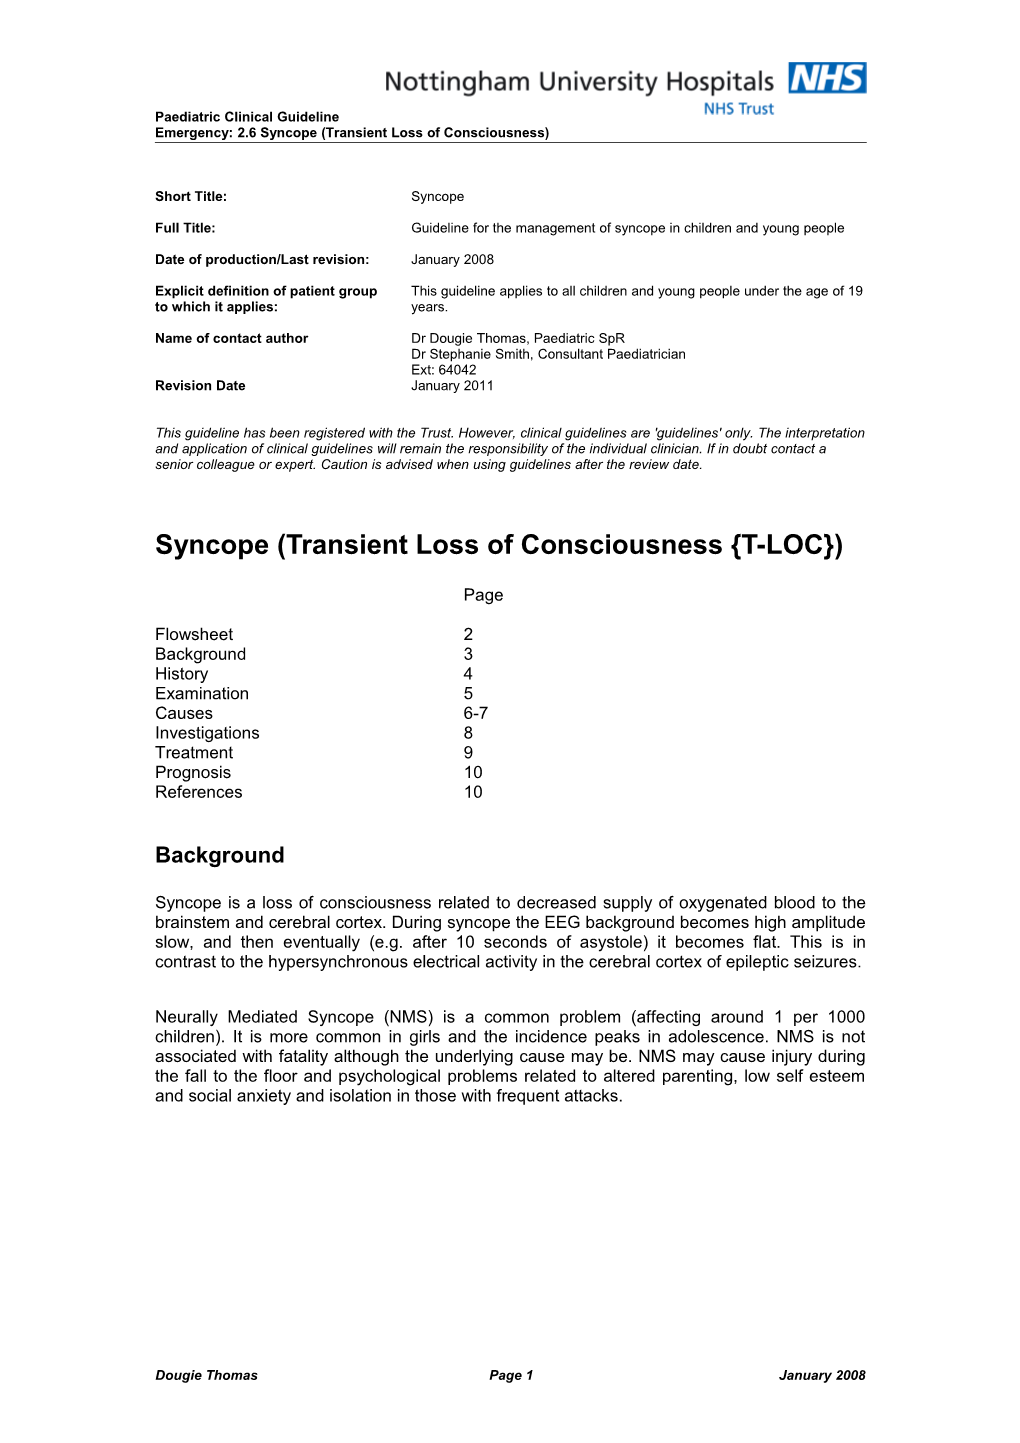 Syncope (Transient Loss of Consciousness T-LOC )